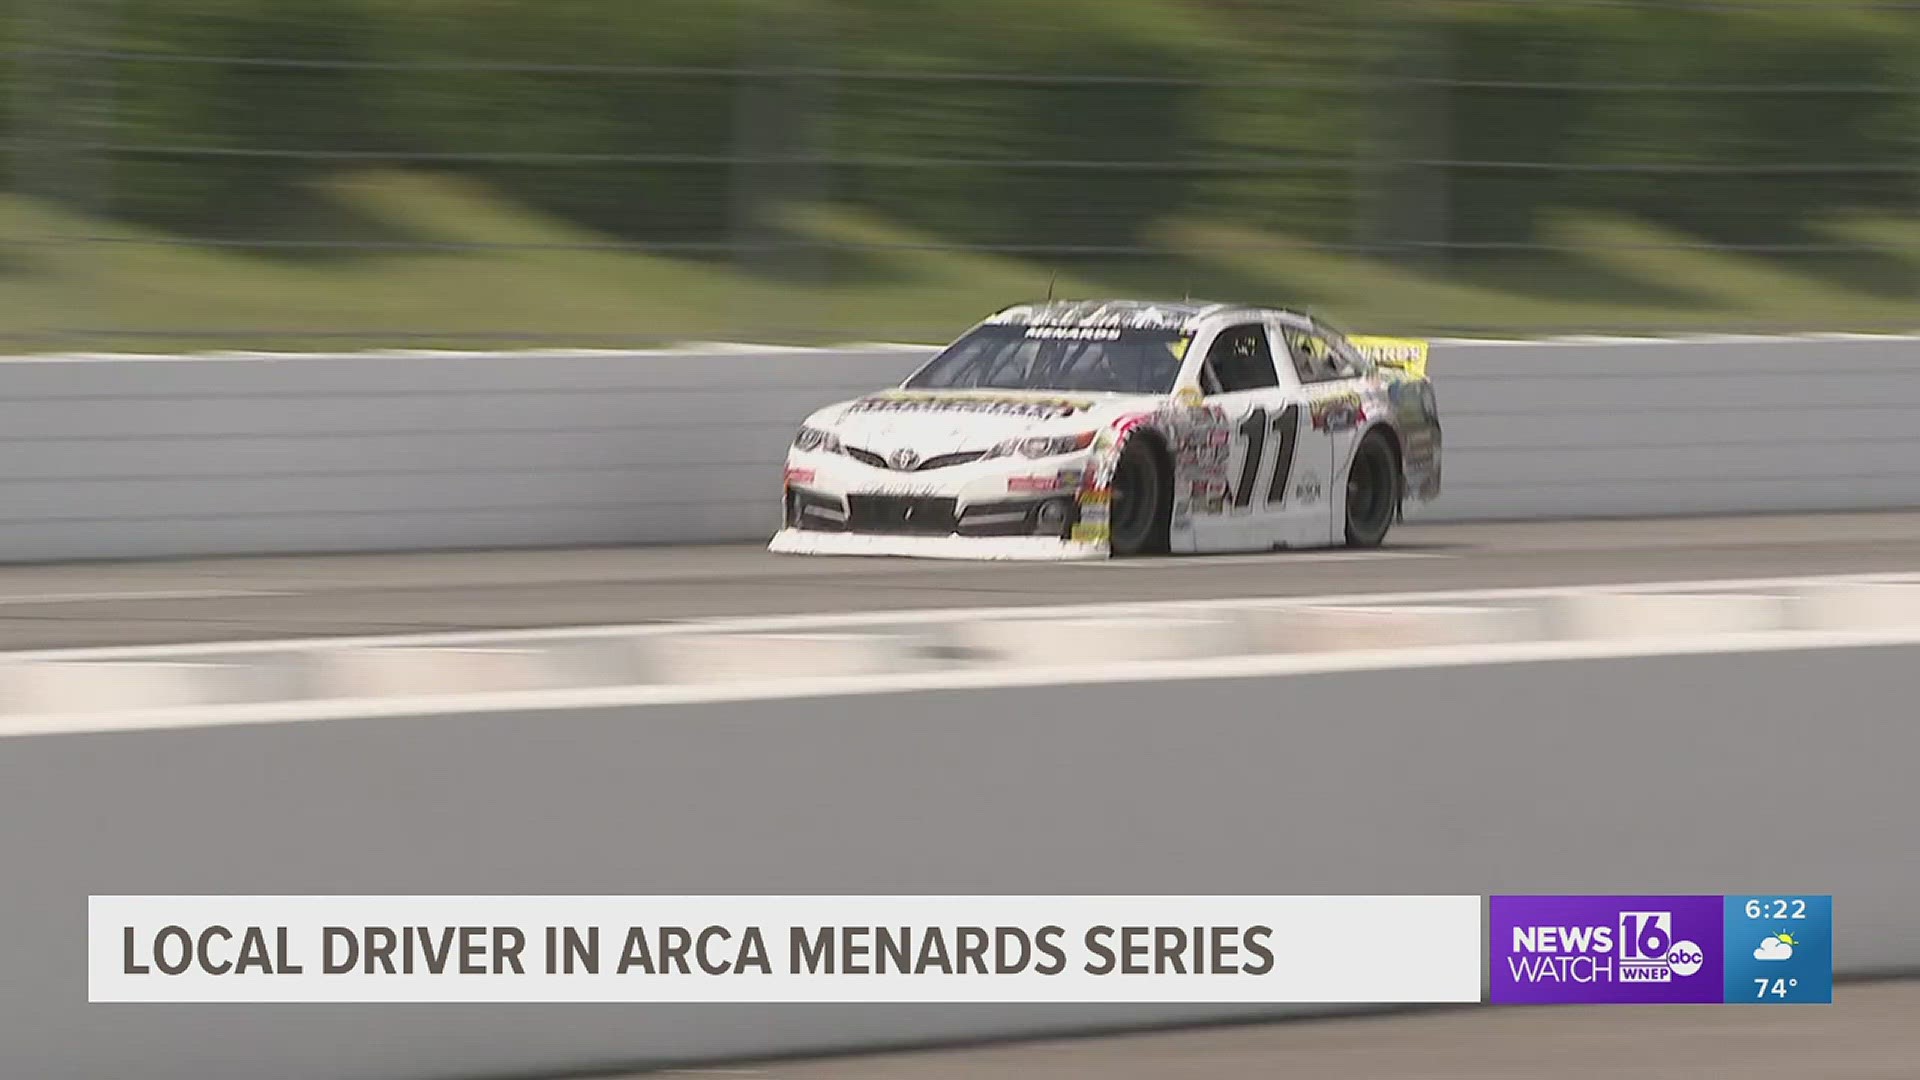 Moyer finished 19th in the 2022 ARCA Menards race at Pocono